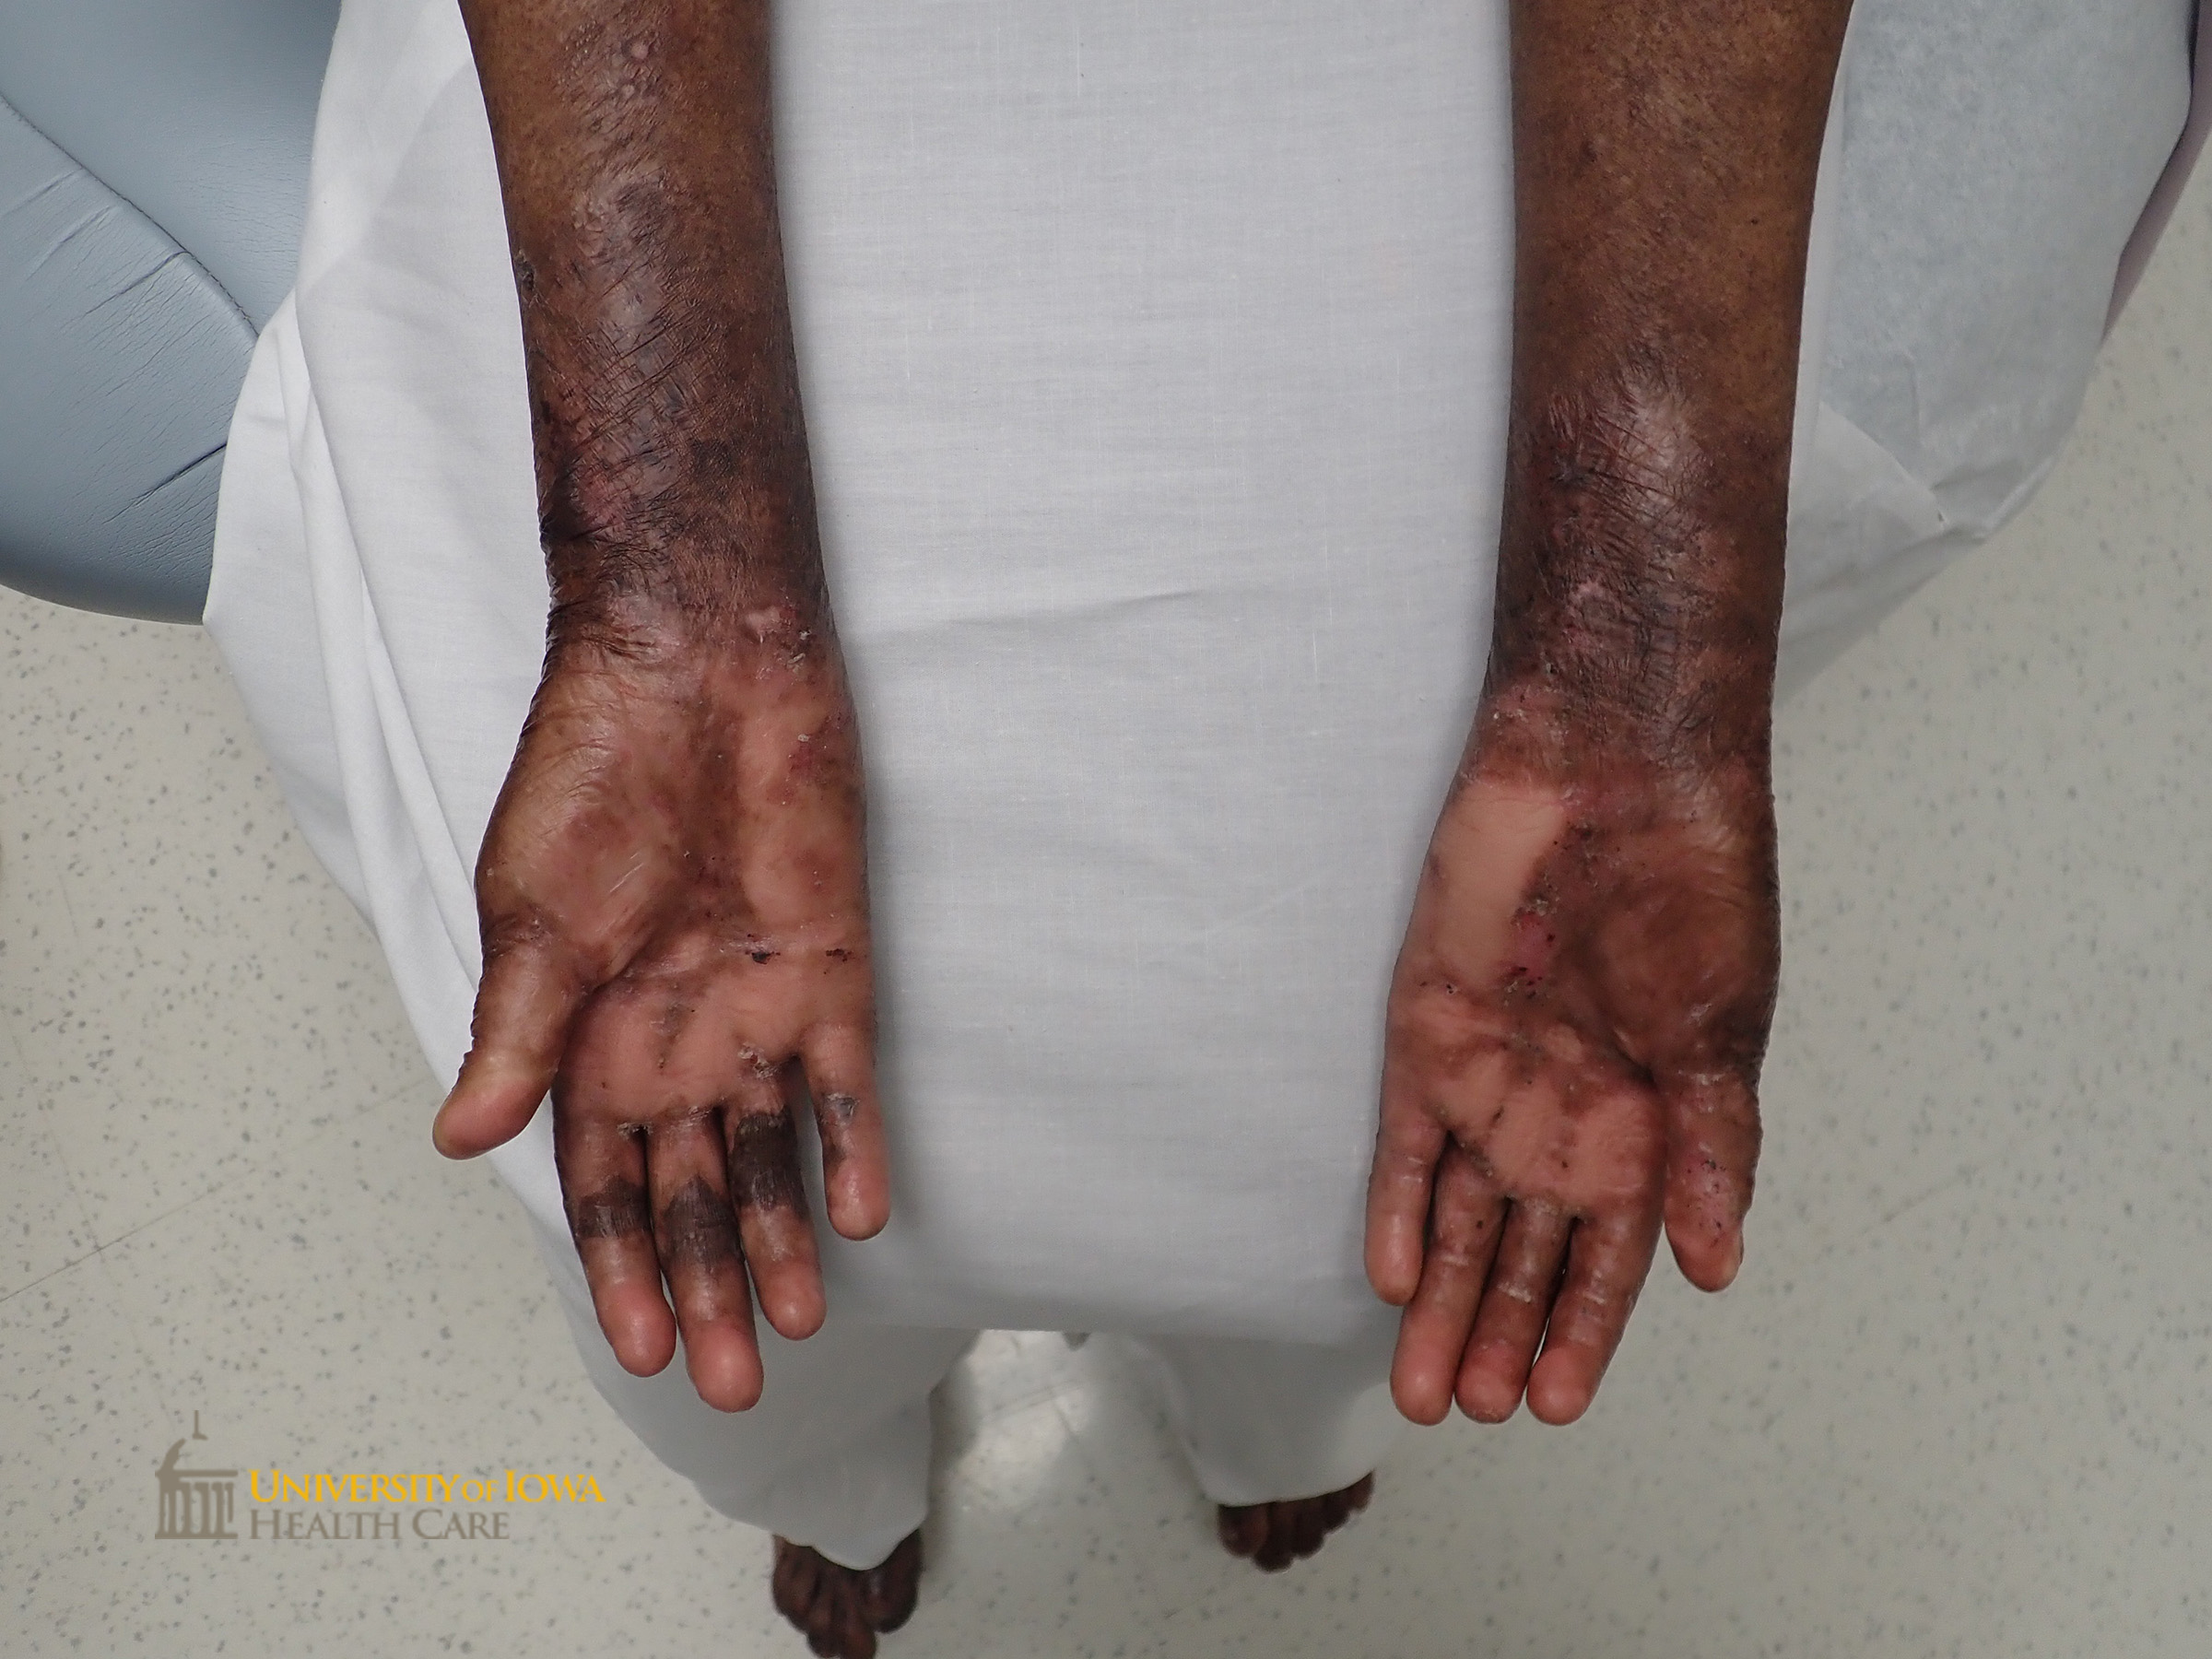 Pink scaring of bilateral palms with focal areas of erosion. (click images for higher resolution).